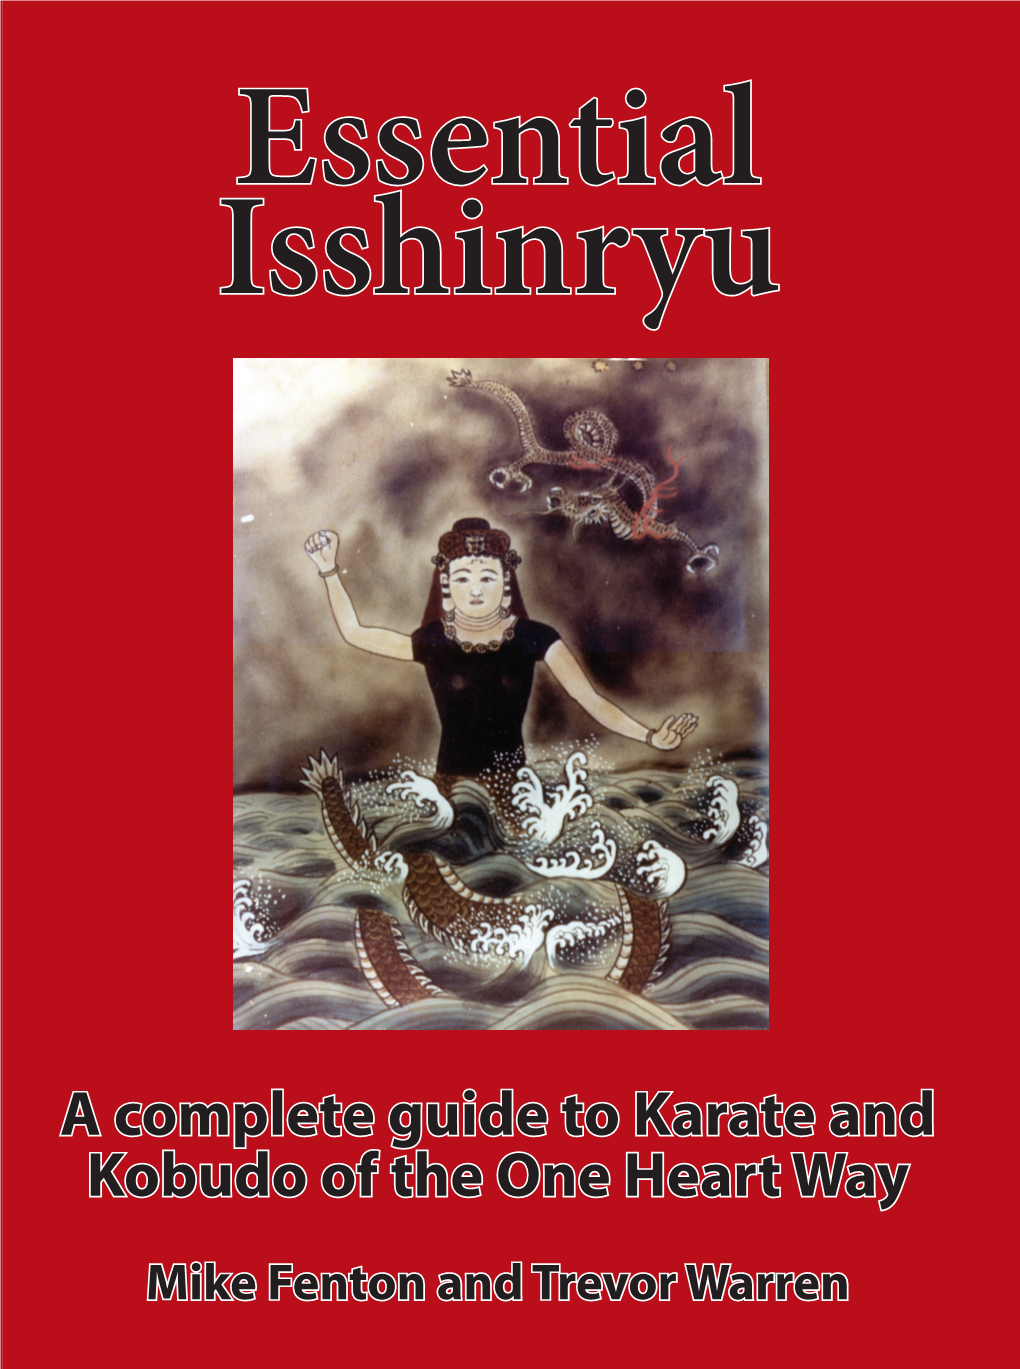 A Complete Guide to Karate and Kobudo of the One Heart